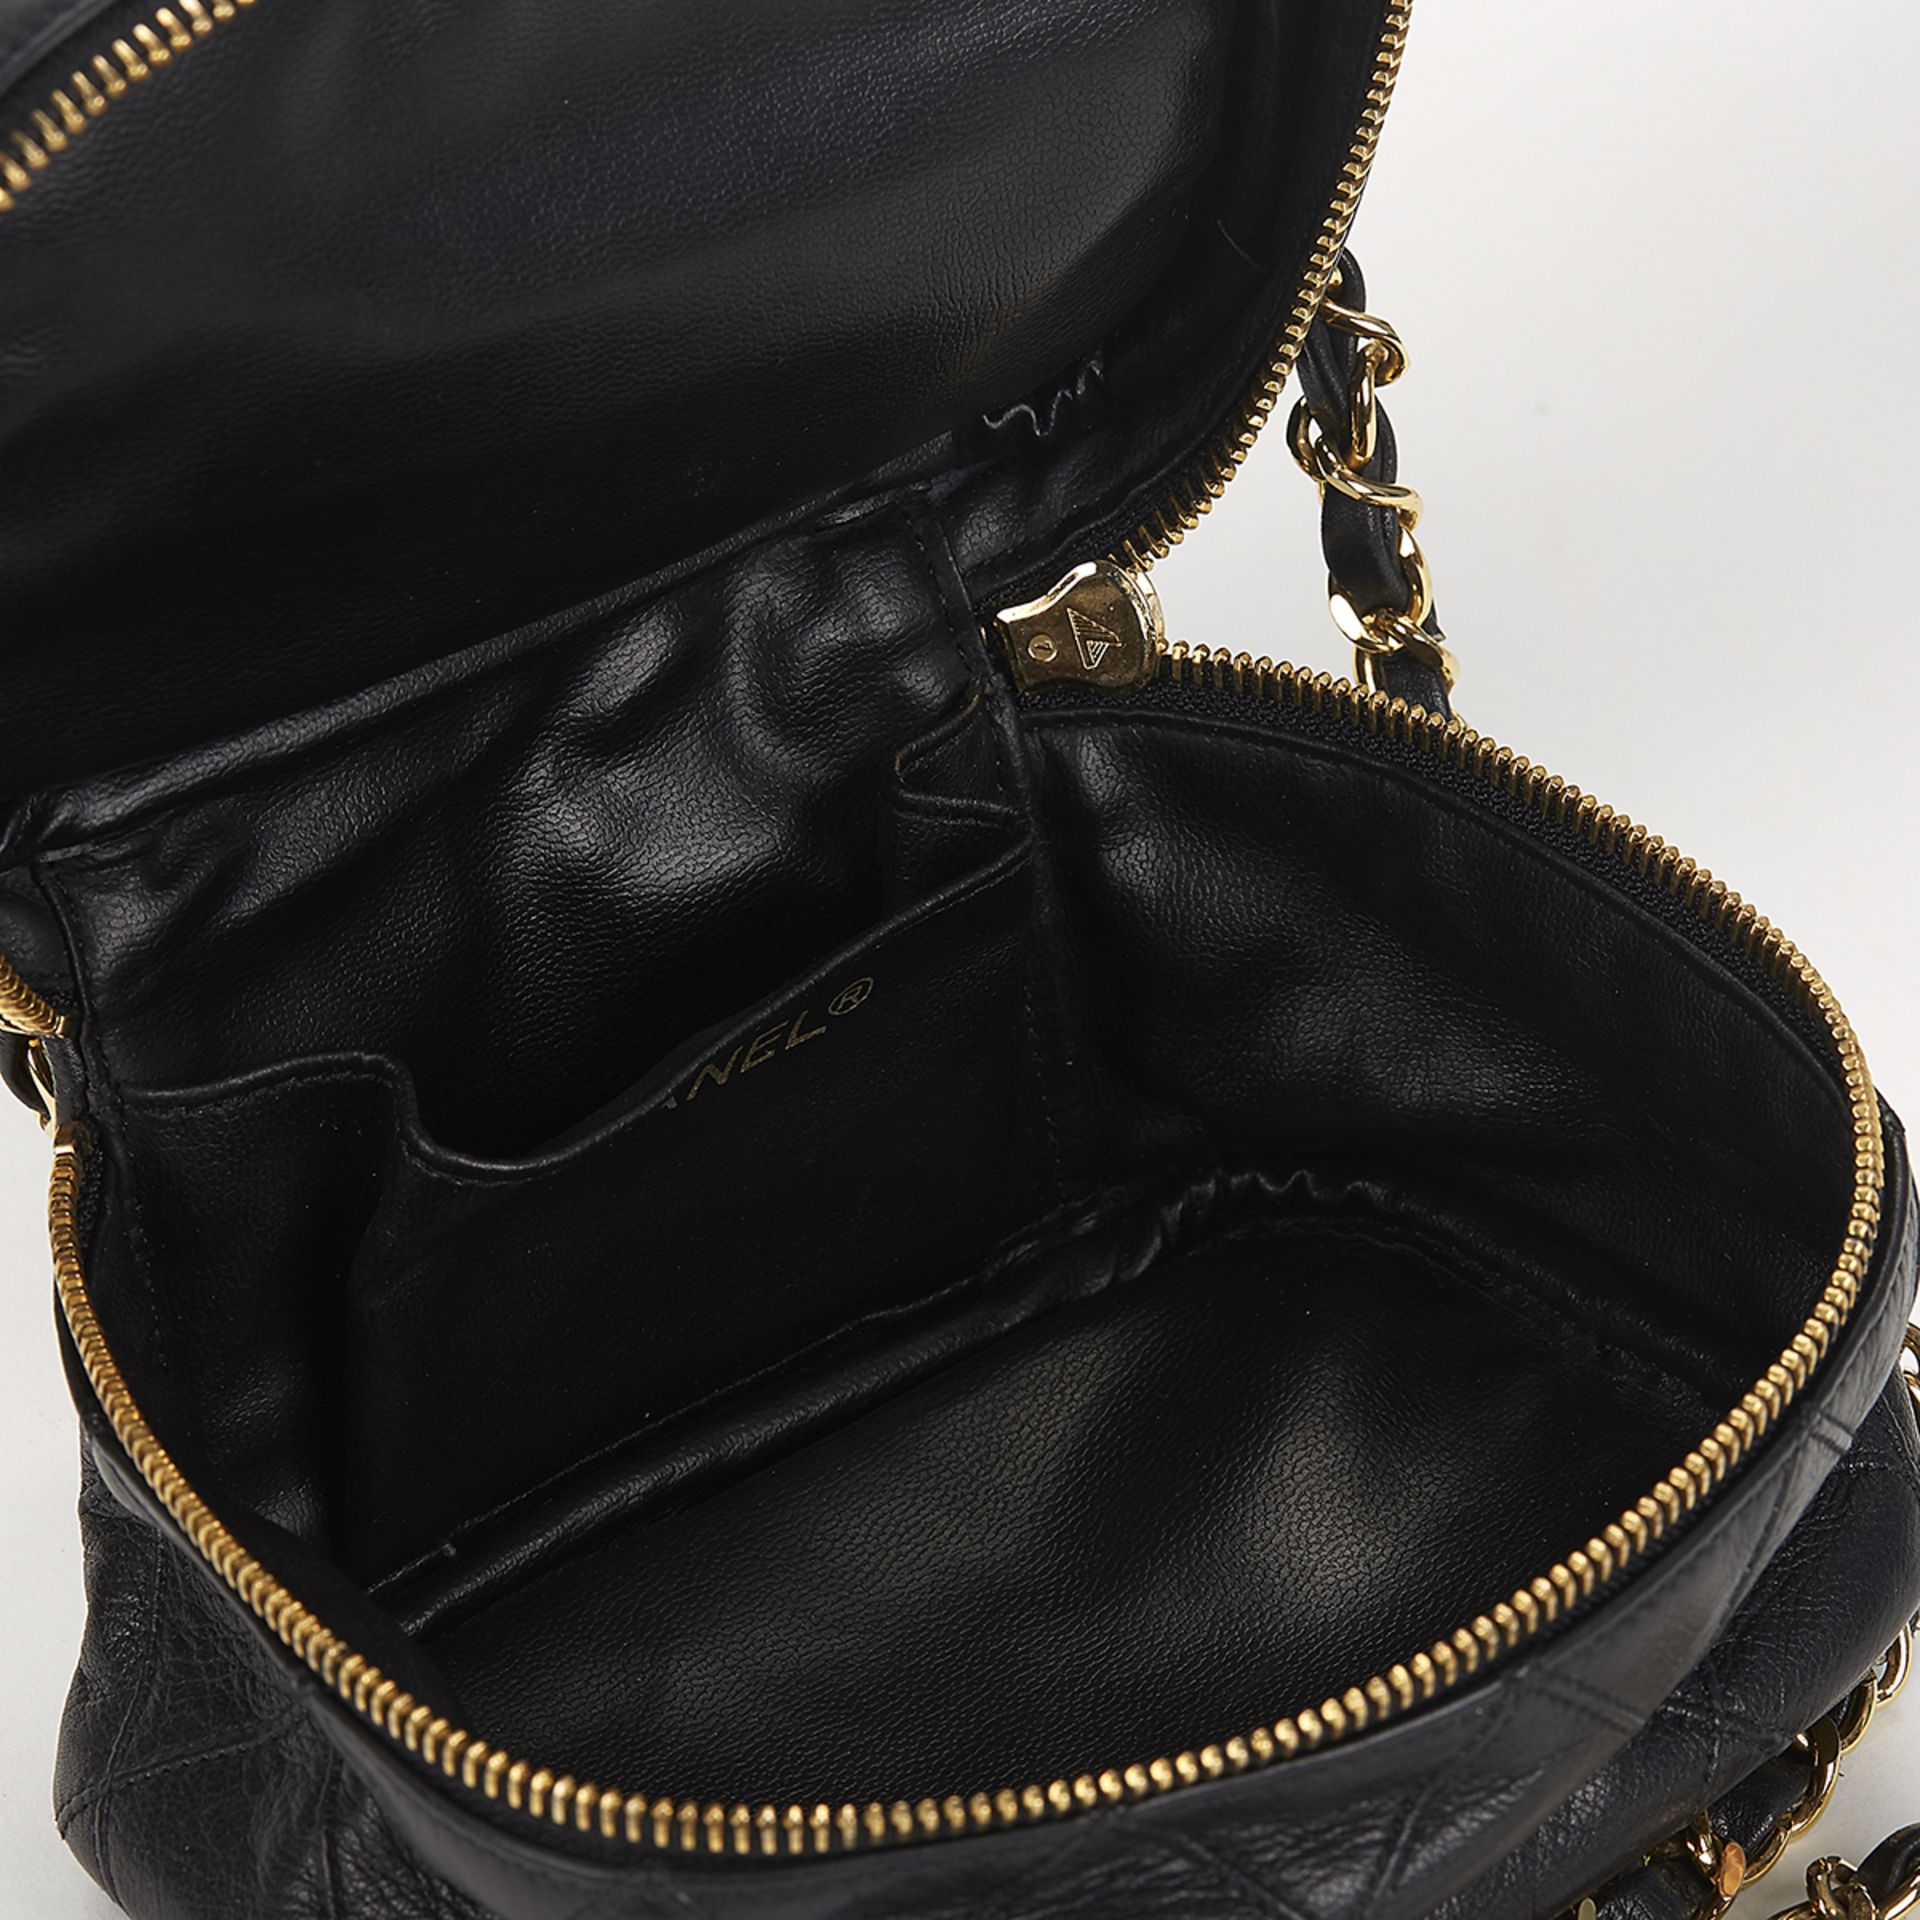 CHANEL Mini Timeless Train Case - Image 8 of 9